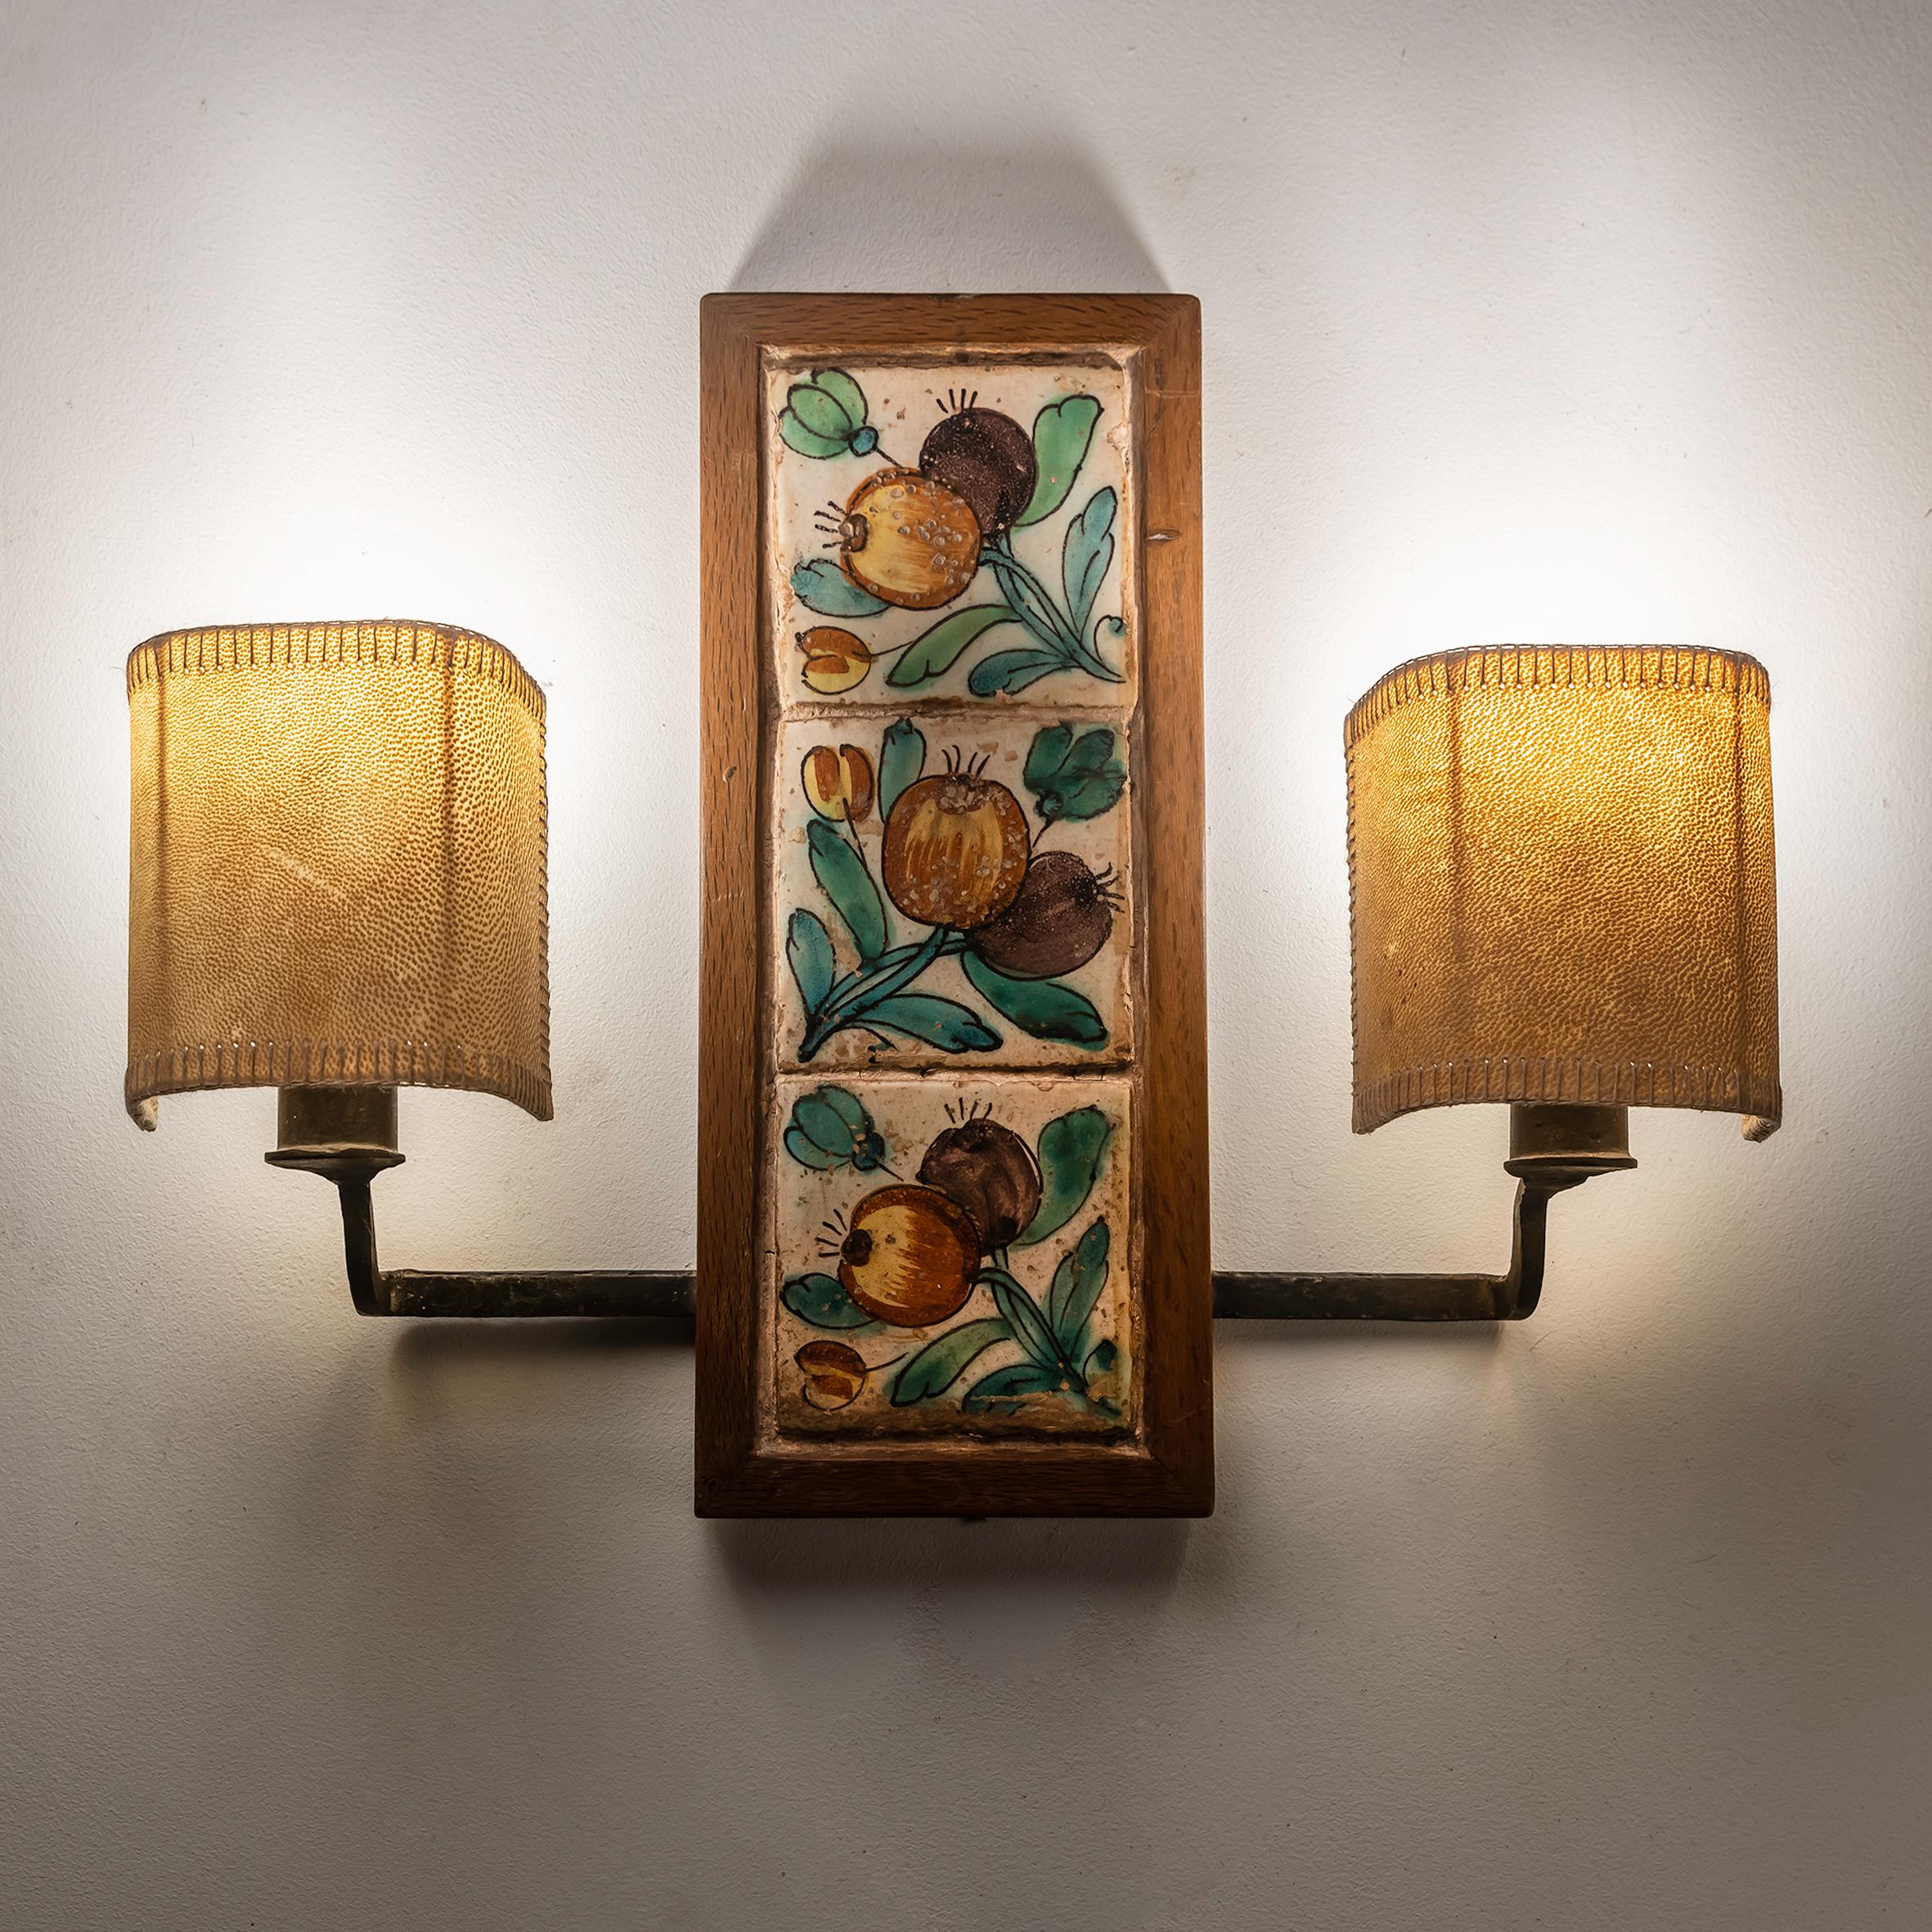 This pair of Valencian Tile Sconces exudes a distinct charm and allure, making them truly unique and special. Crafted in the heart of Valencia, Spain, these sconces showcase the rich cultural heritage and craftsmanship of the region, dating back